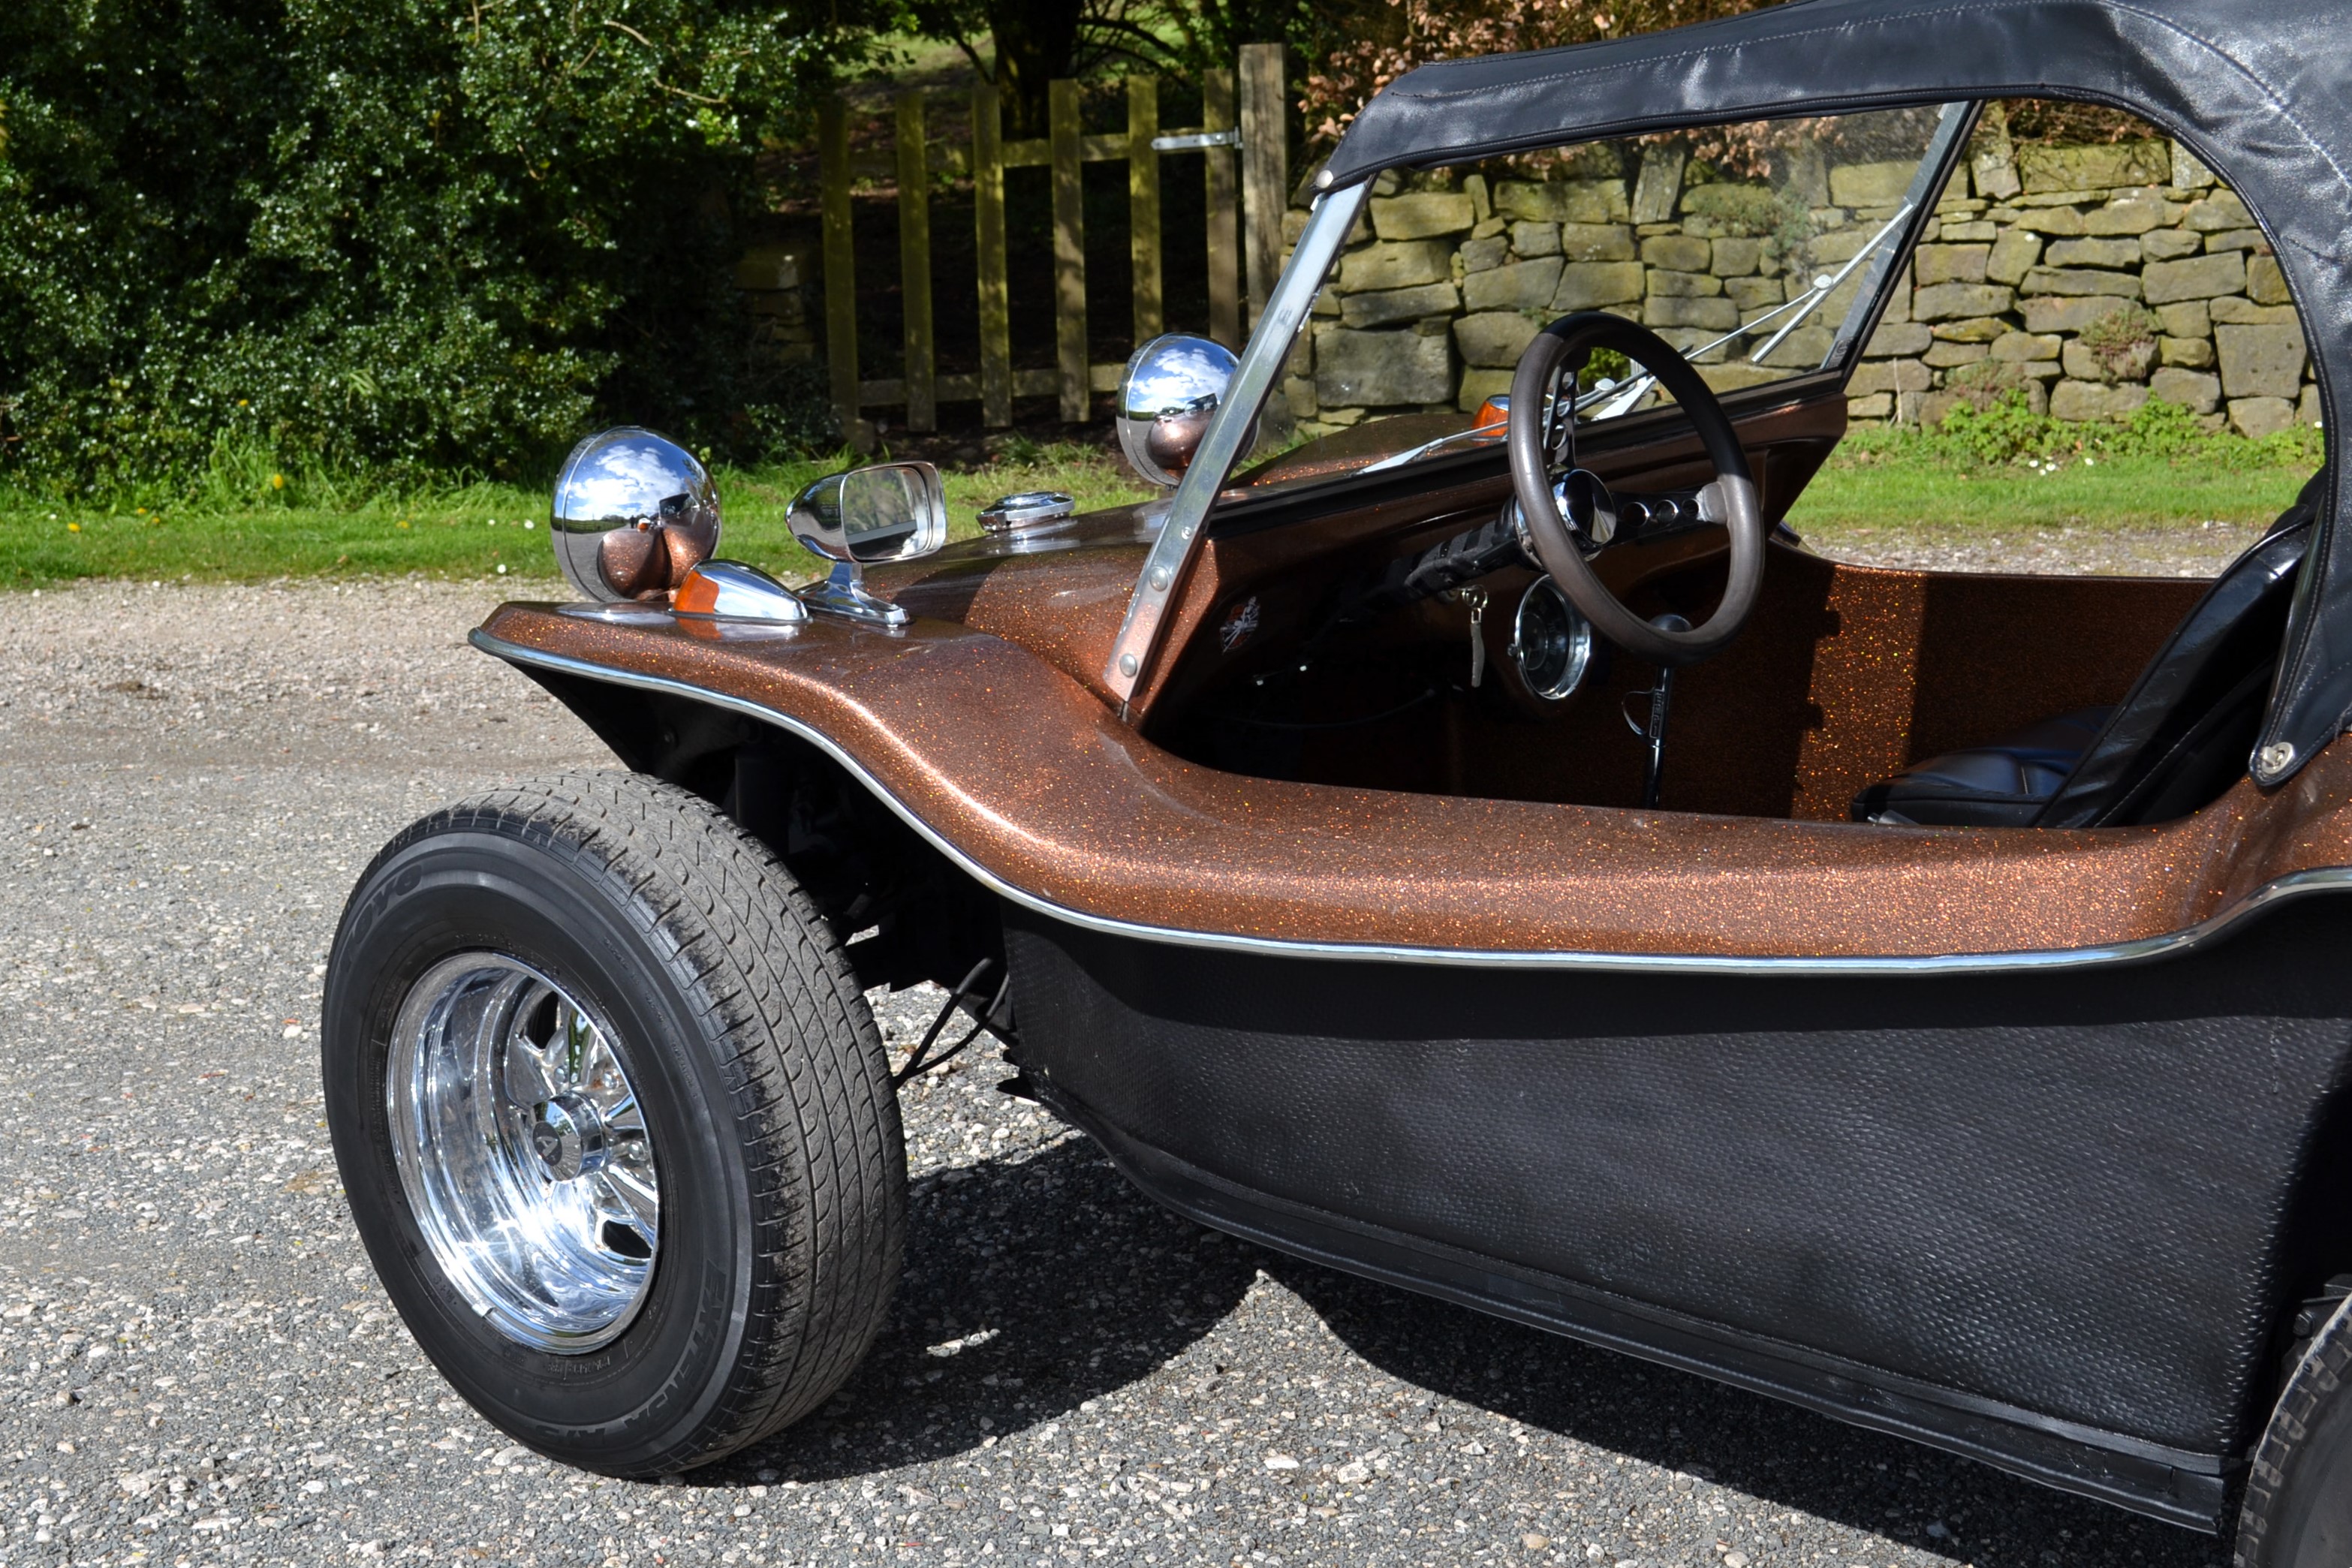 1968 Volkswagen Beach Buggy SWB ‘Meyers Manx Evocation’ No Reserve - Image 21 of 29